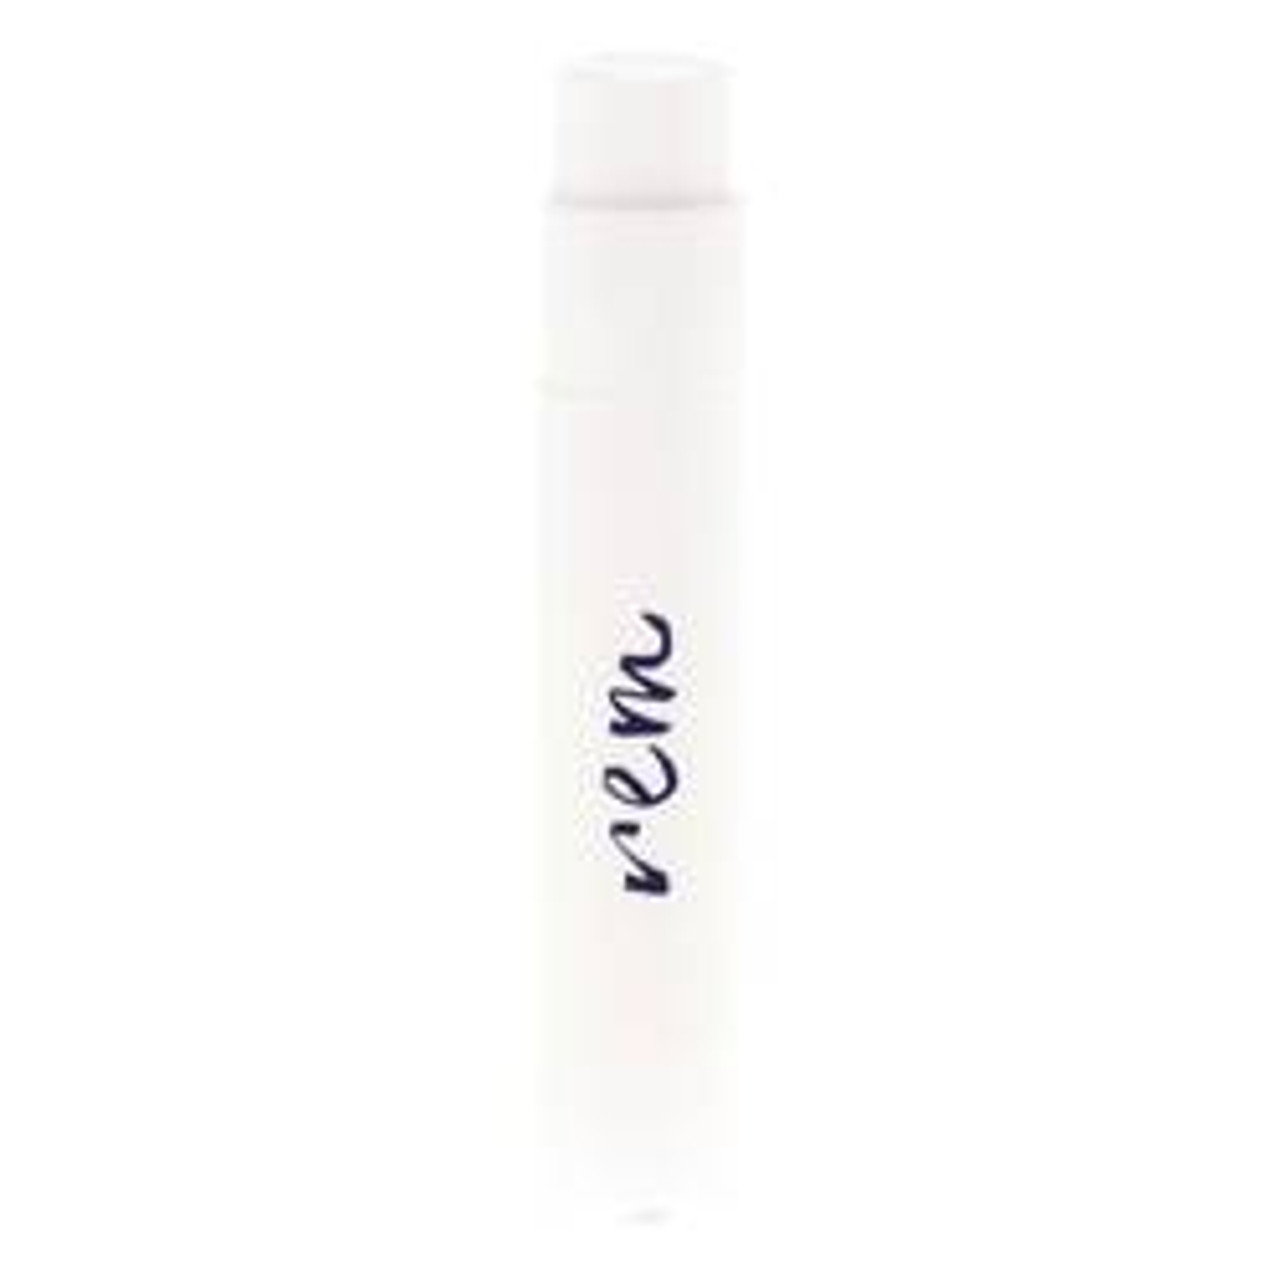 Rem Reminiscence Perfume By Reminiscence Vial (sample) 0.04 oz for Women - [From 11.00 - Choose pk Qty ] - *Ships from Miami